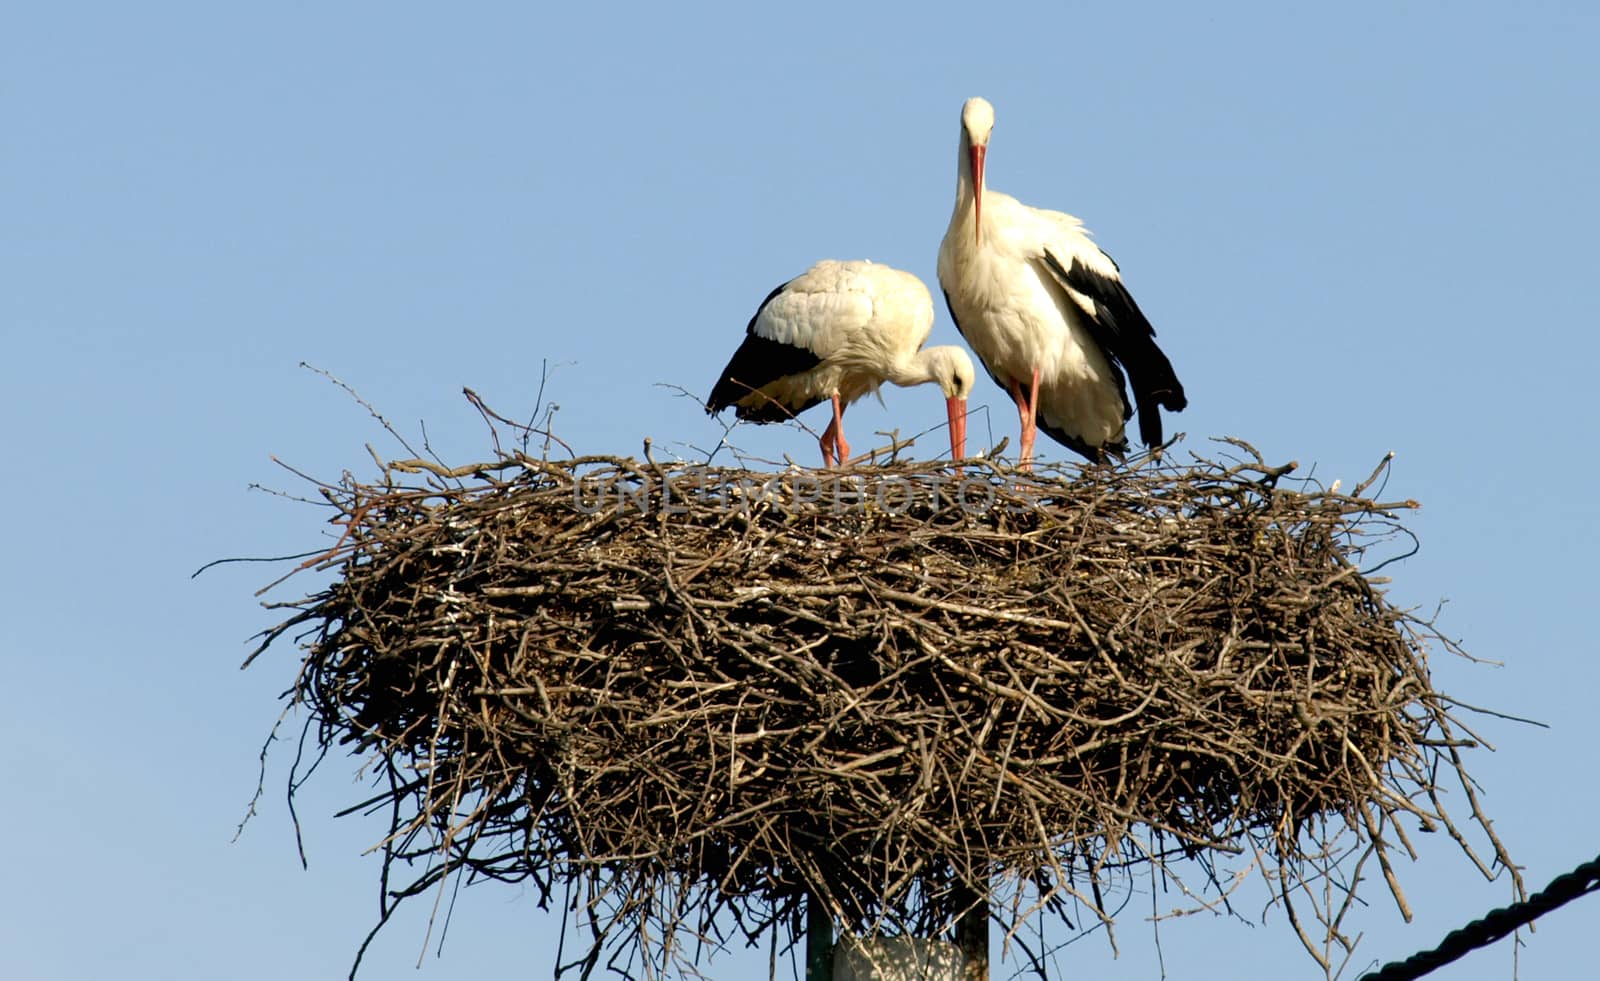 storks in the nest by pm29